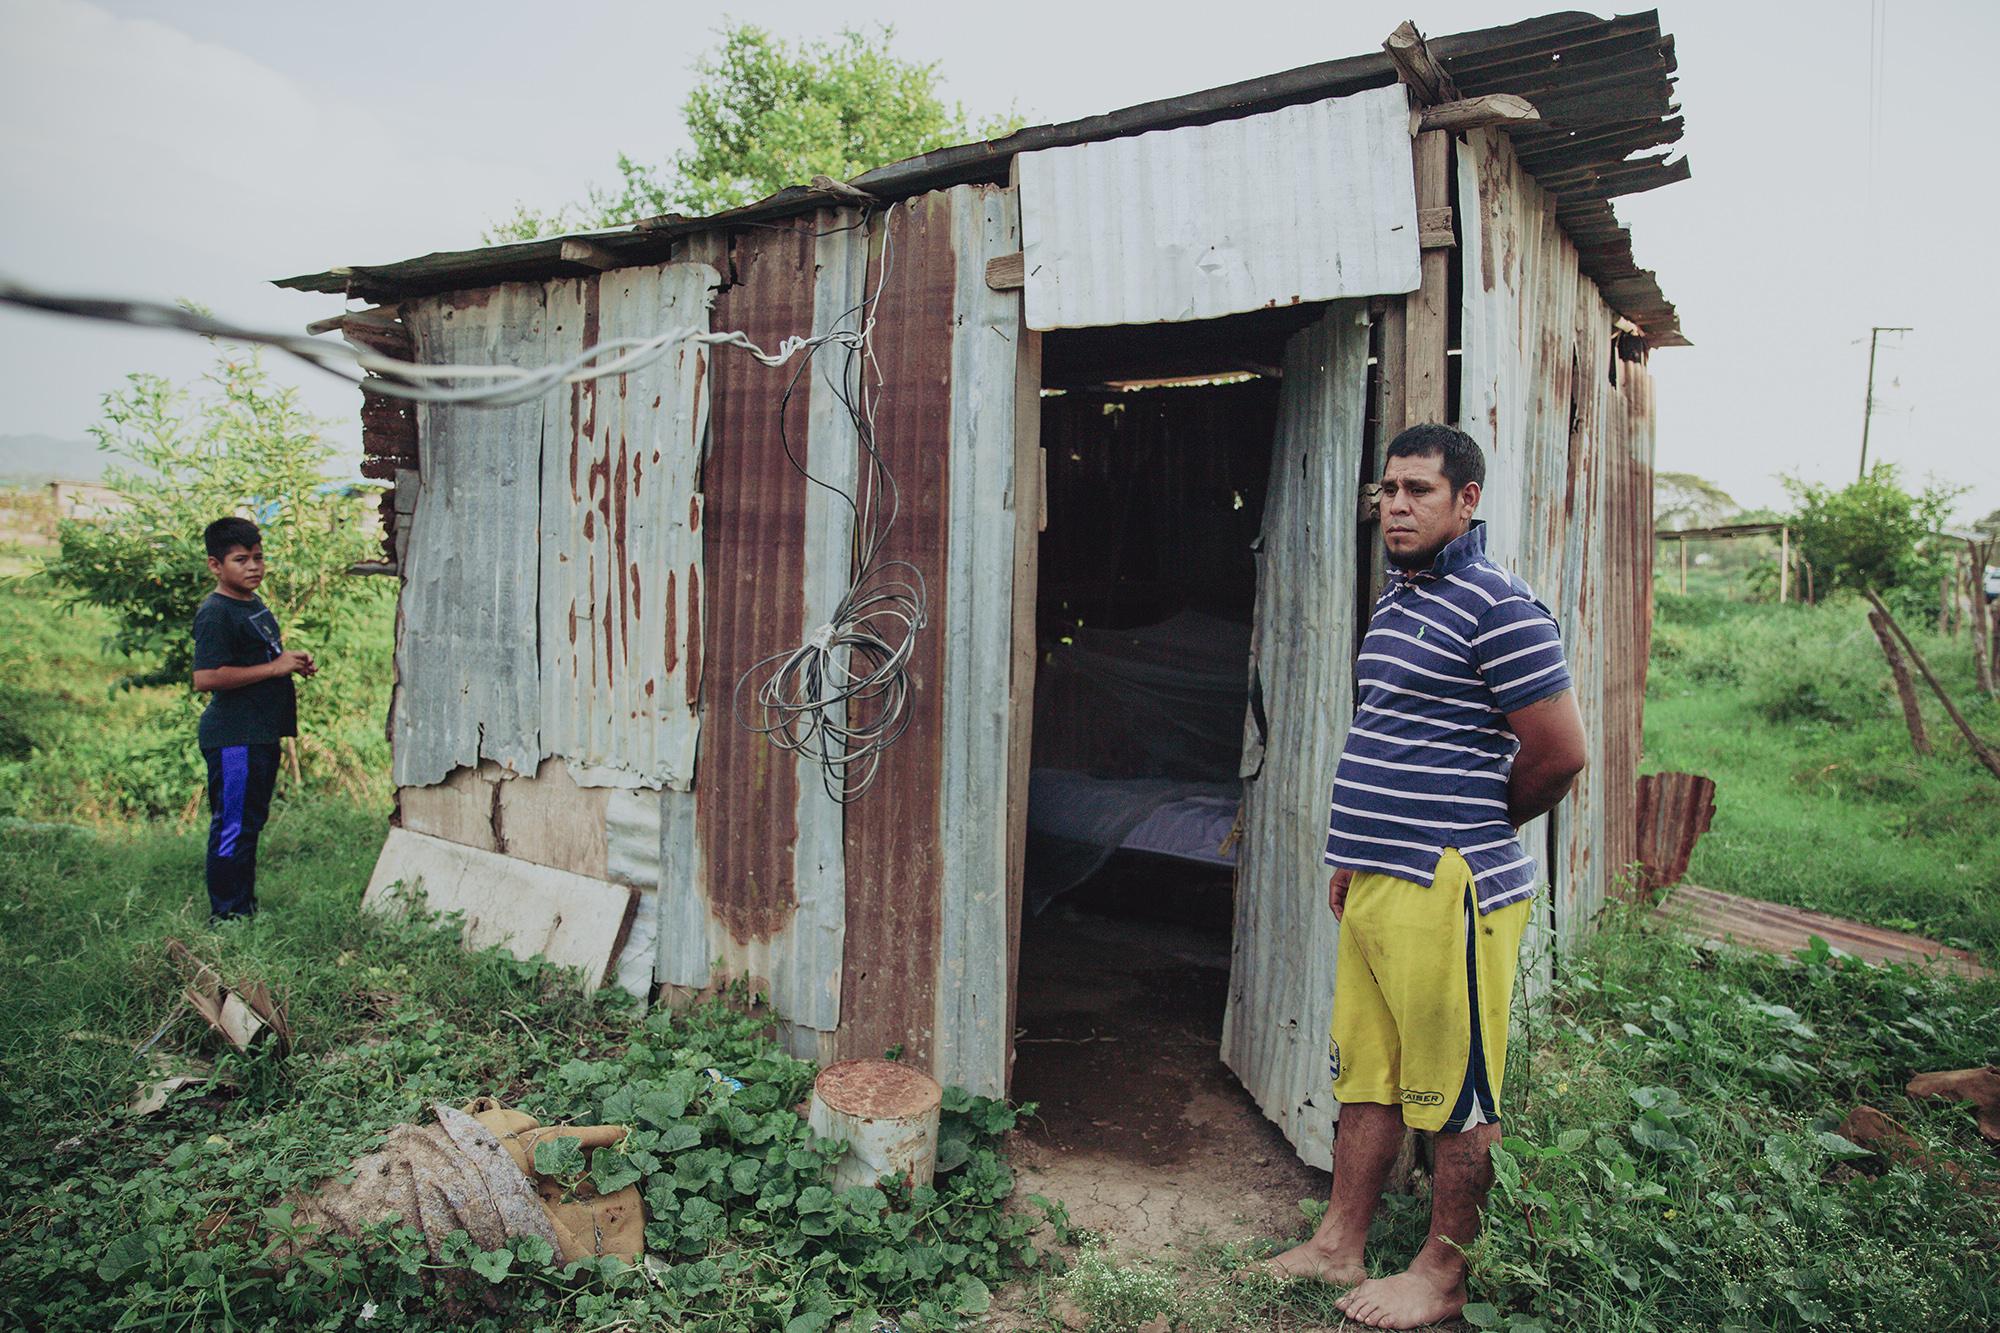 Edwin García is 33 years old and lives in a small tin shack in the Nueva Esperanza 2 community. Earlier this year in January, Edwin decided to join a caravan to the United States. His trip was short-lived when he was caught and deported from Tecún Umán. Photo: Carlos Barrera/El Faro